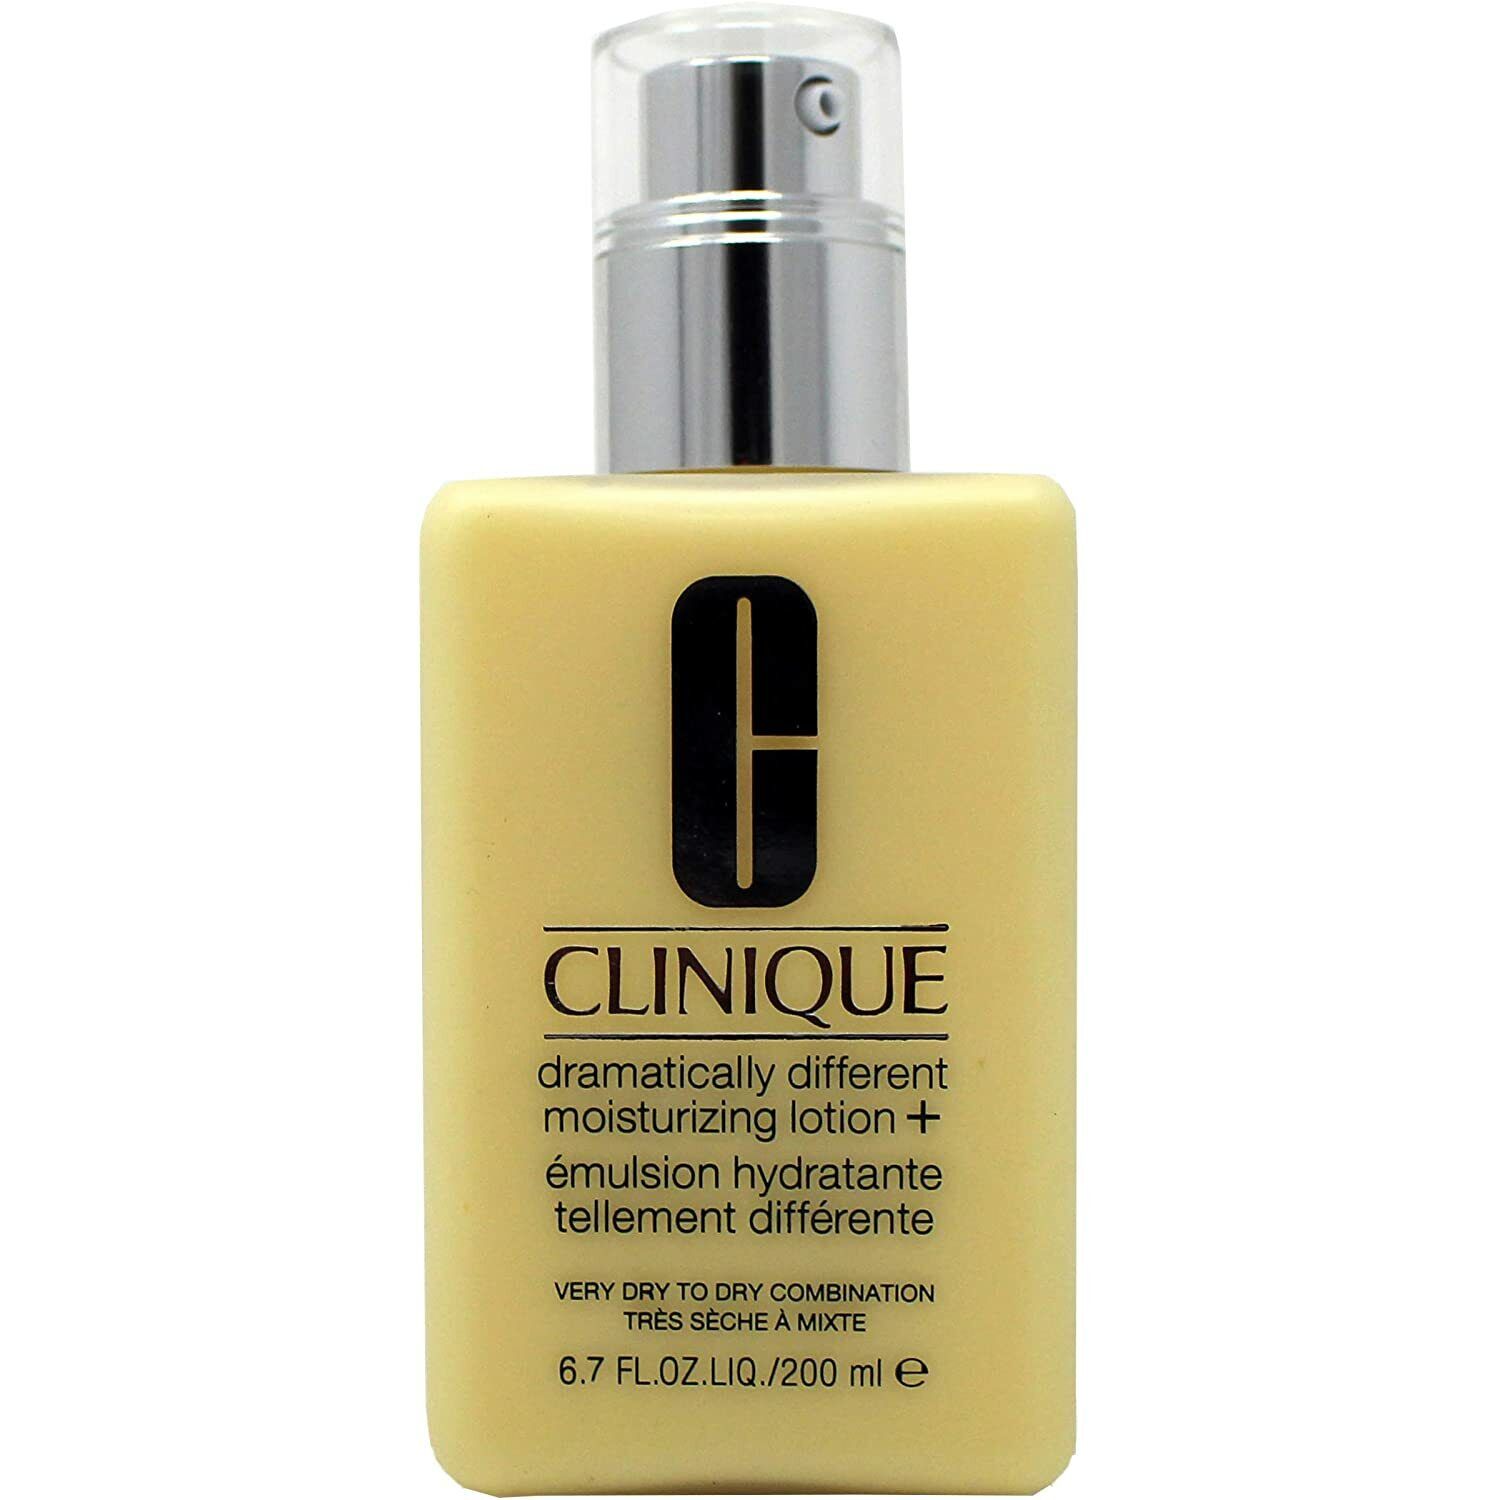 Clinique Dramatically Different Moisturizing Lotion+ JUMBO S